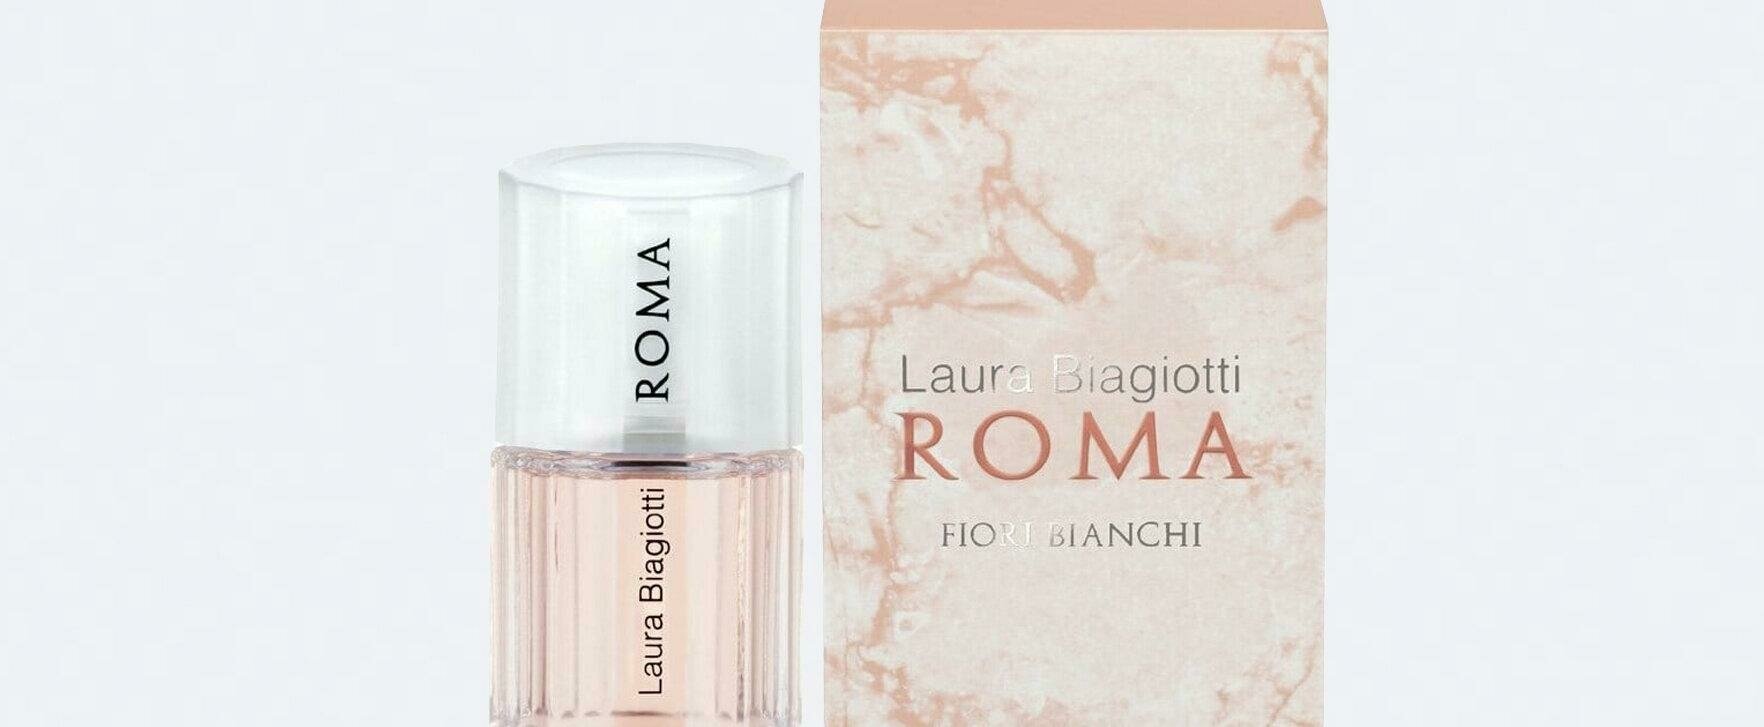 A Tribute to Femininity and Rome: The New Feminine Fragrance by Laura Biagiotti